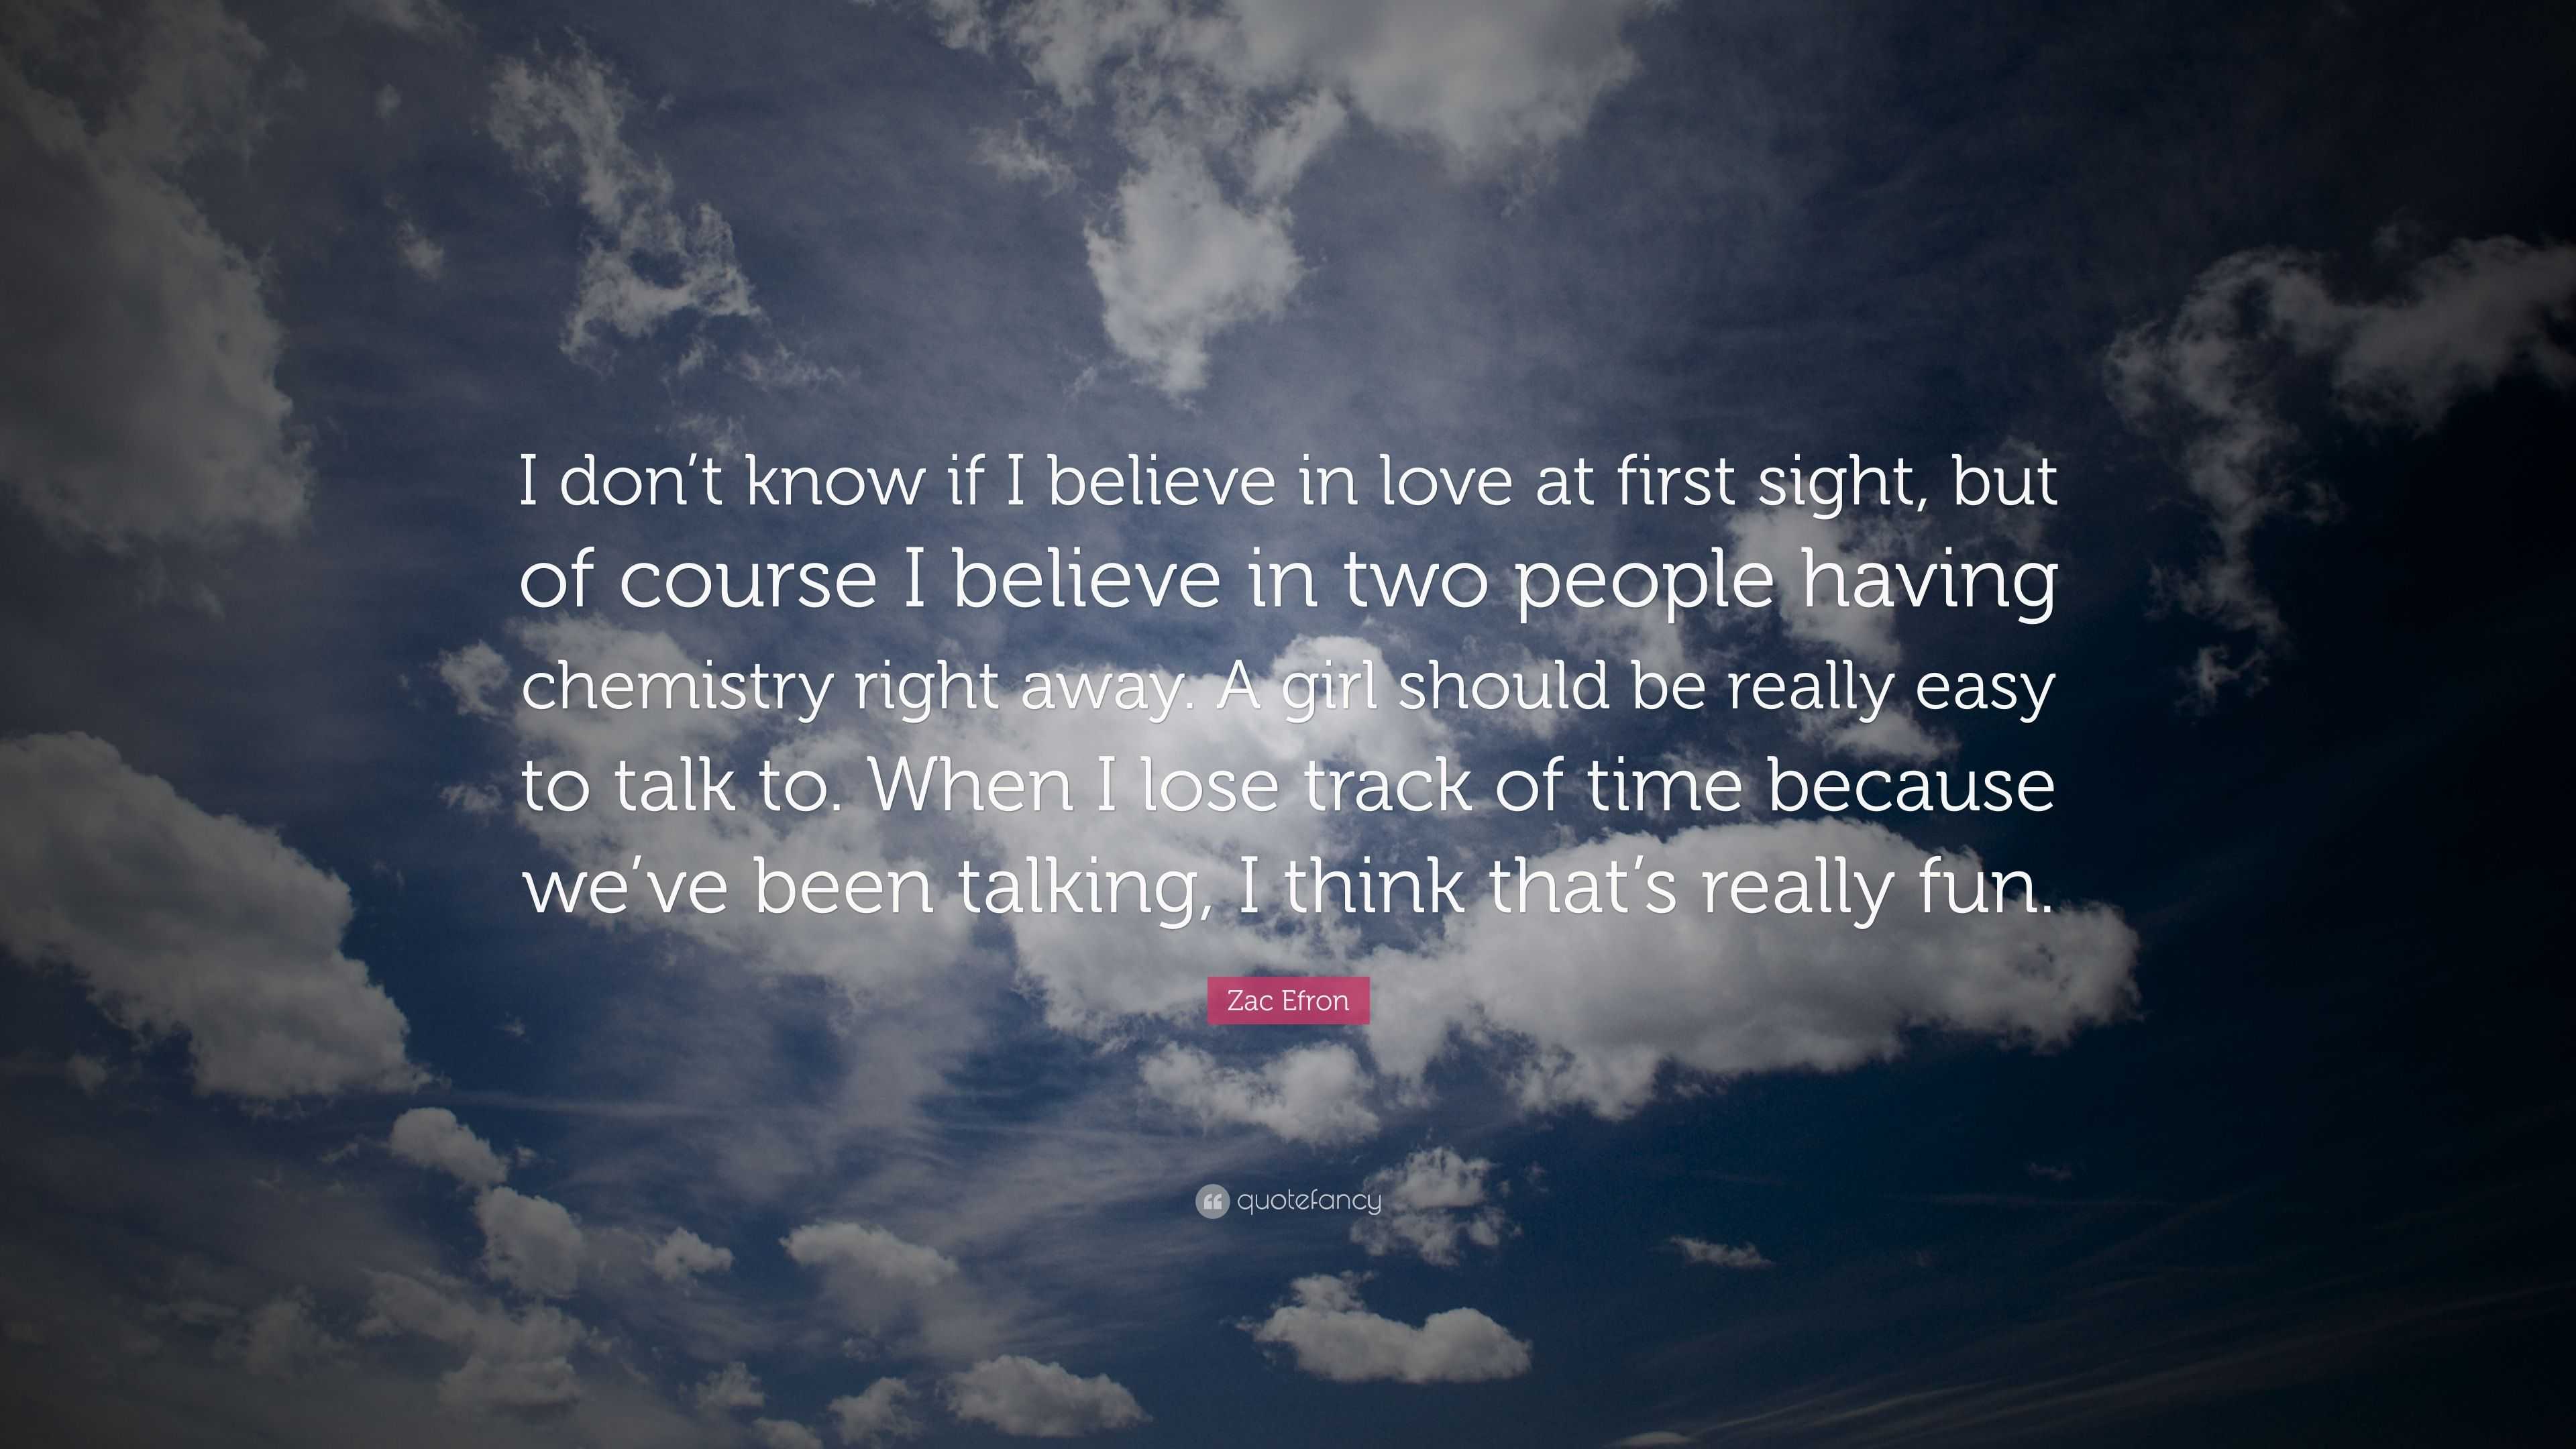 Zac Efron Quote “I don t know if I believe in love at